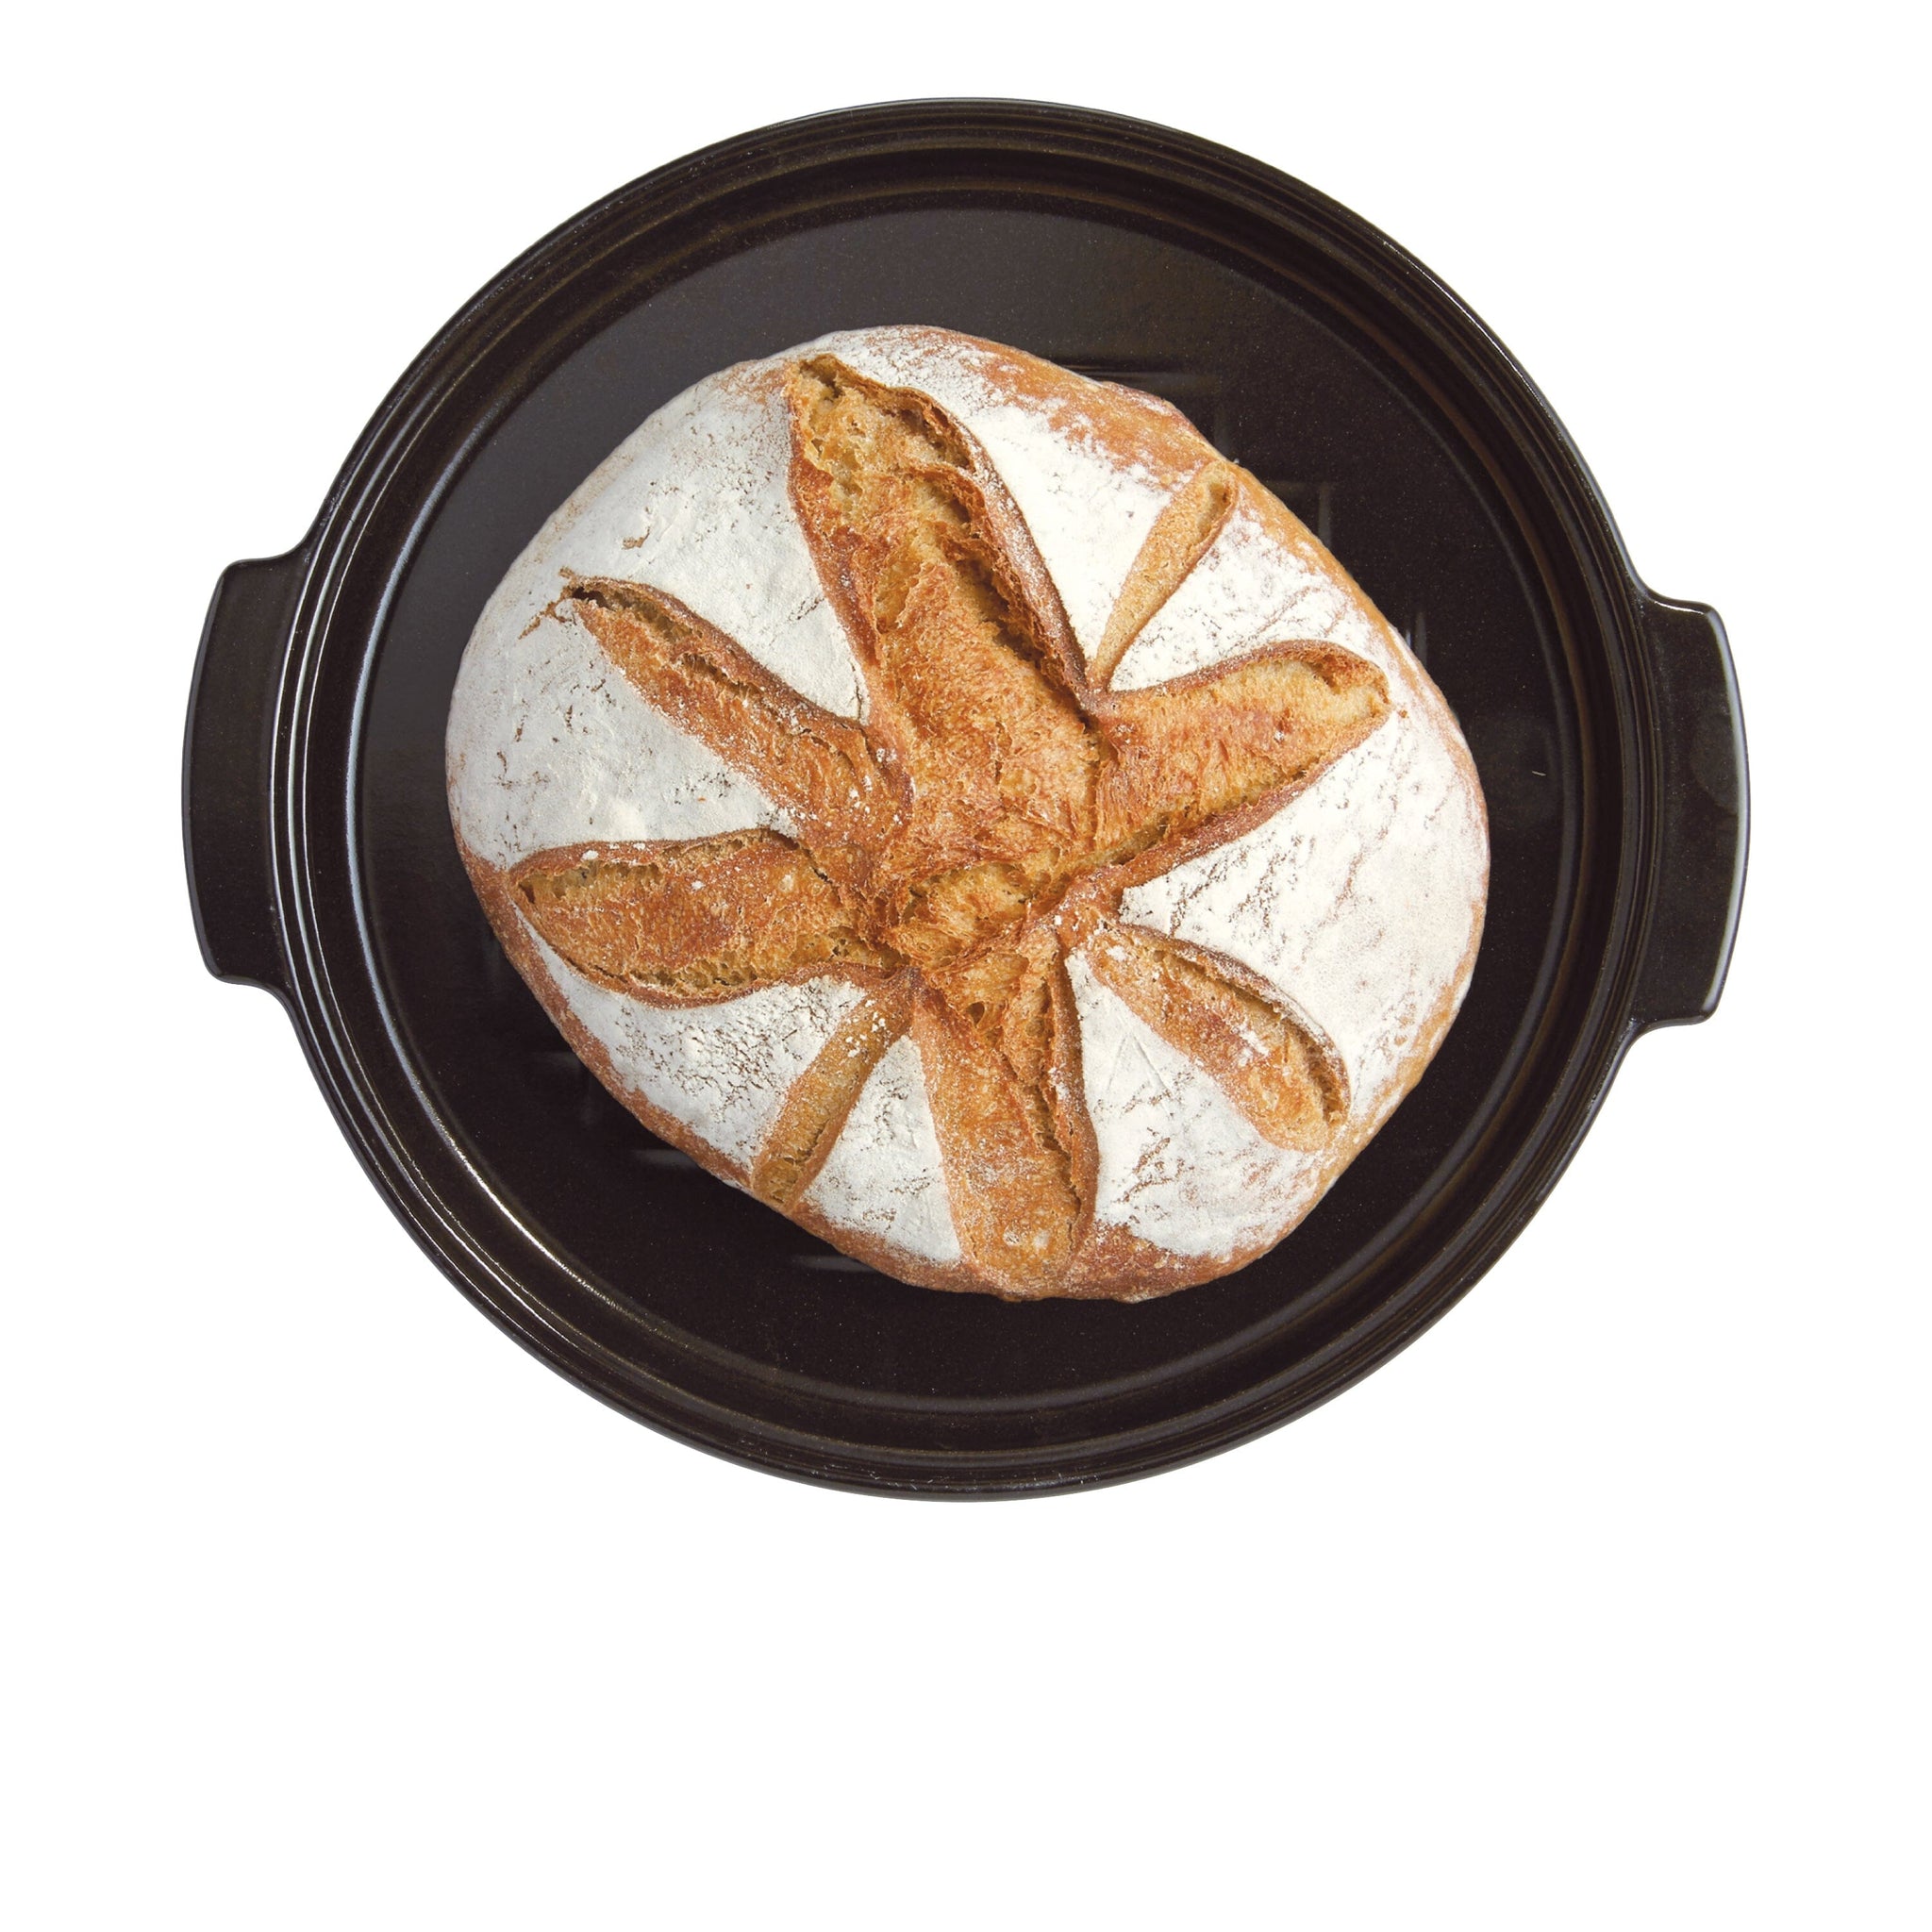 A Beautiful Bake In Our Cloche